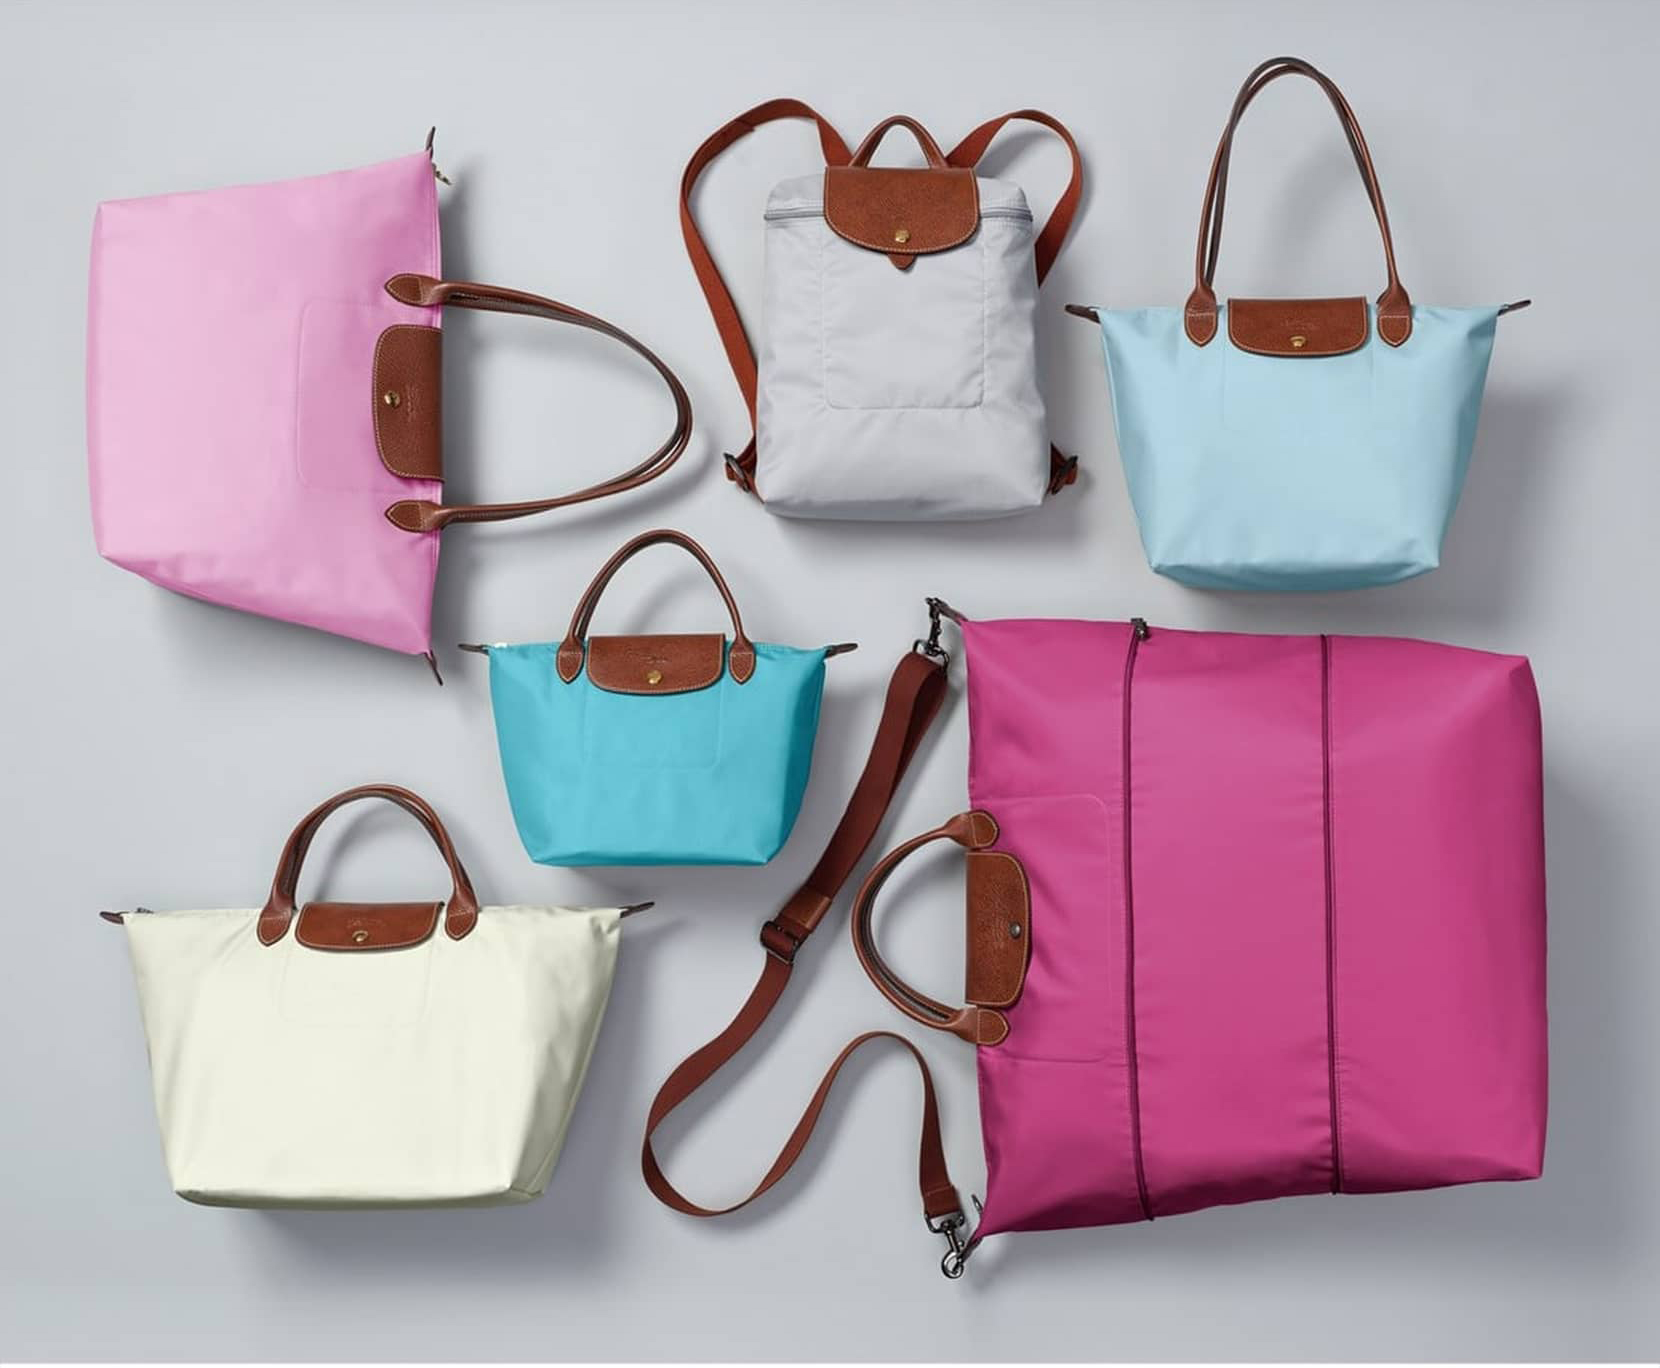 Longchamp Bags Are Sale Right Now — These Are Our